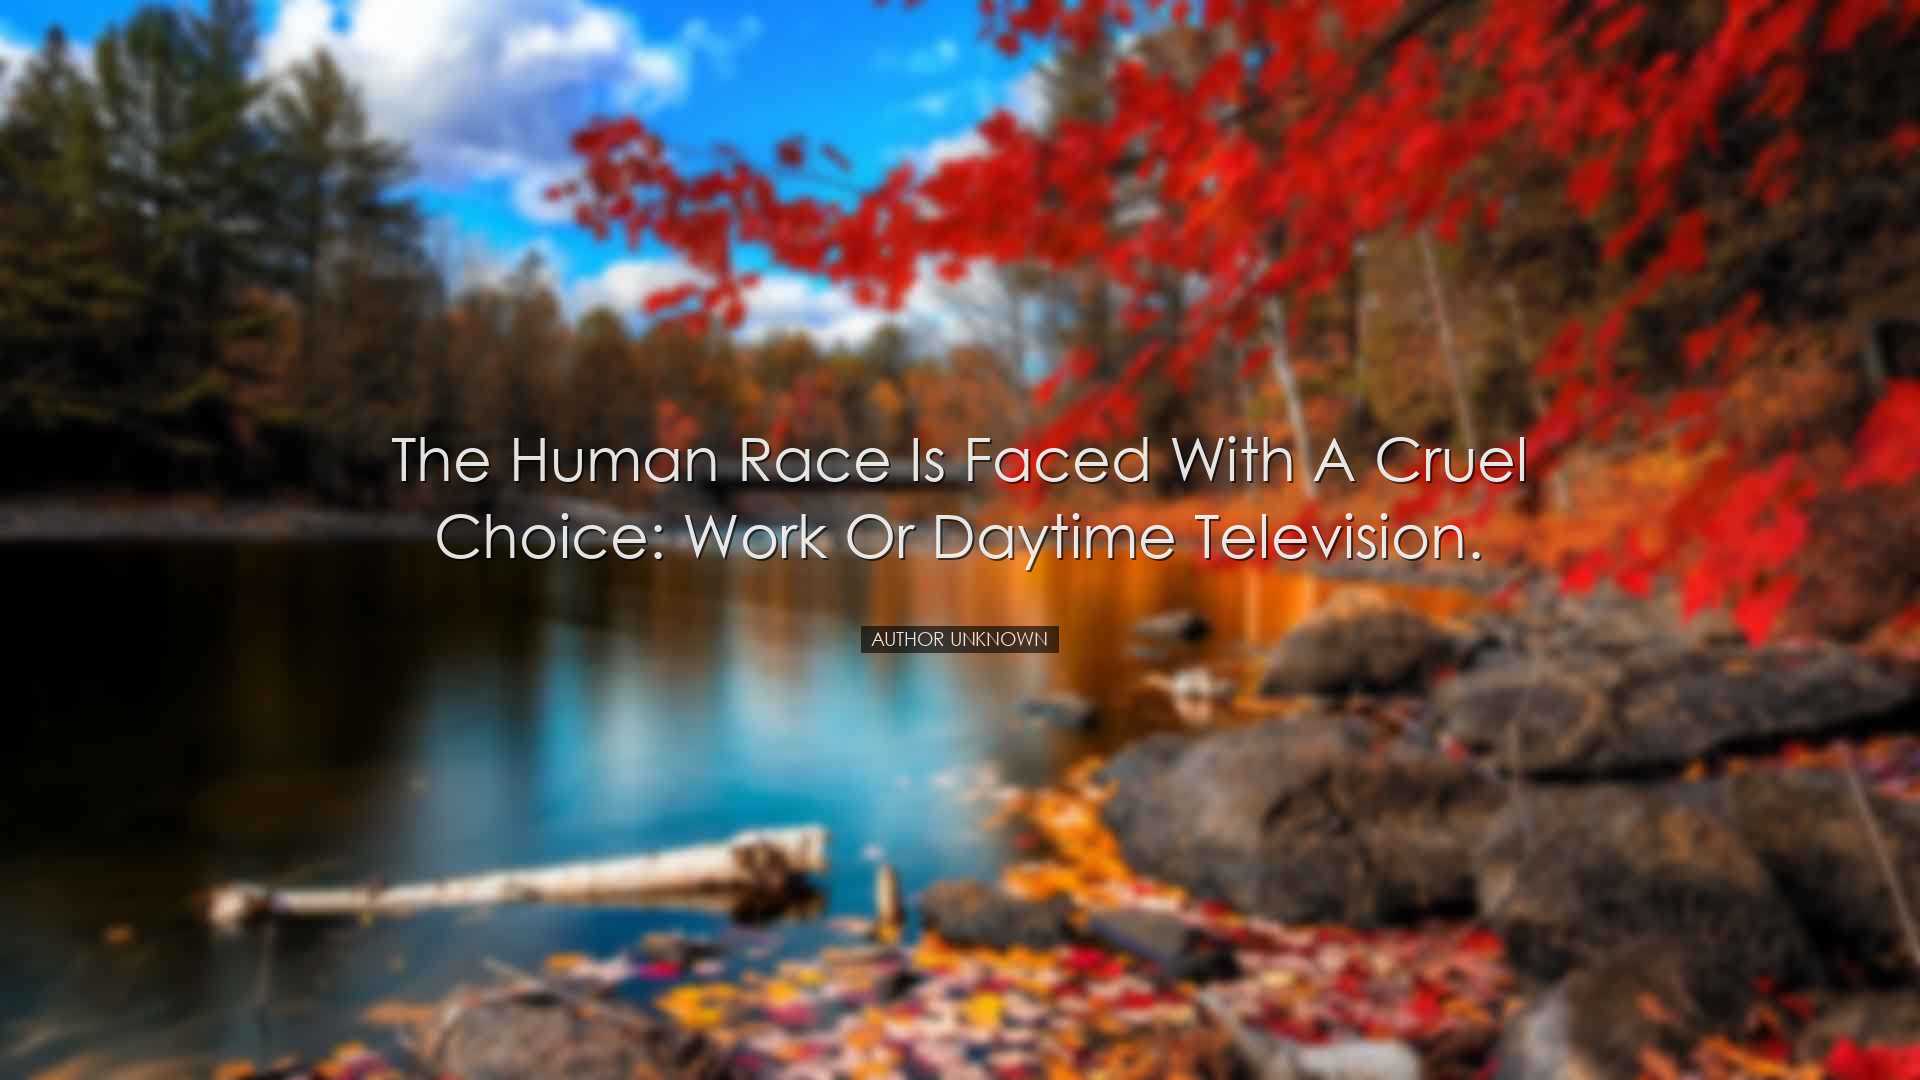 The human race is faced with a cruel choice: work or daytime telev